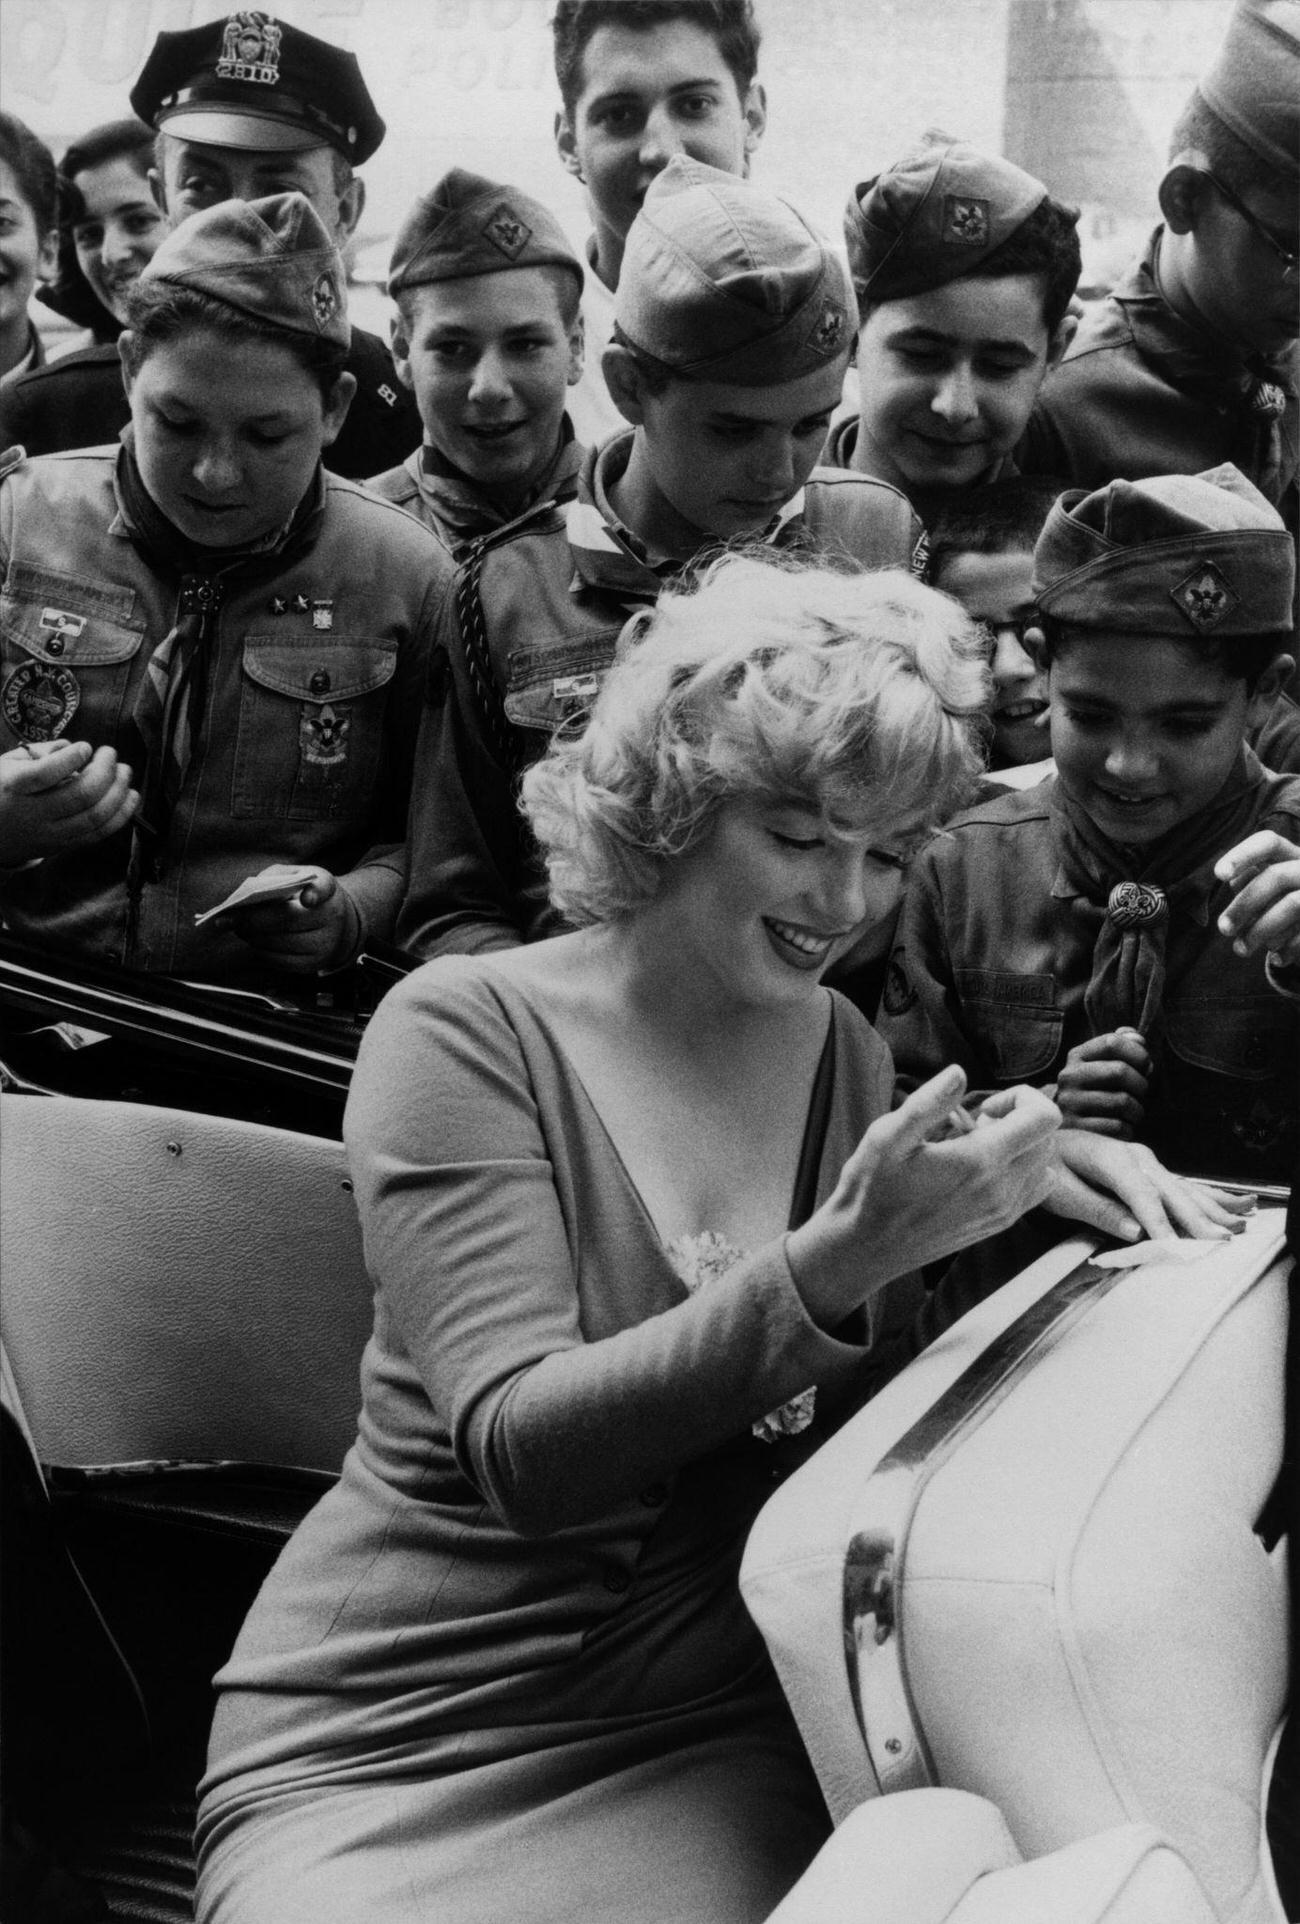 Marilyn Monroe Signs Autograph During Soccer Kick-Off At Ebbets Field, 1957